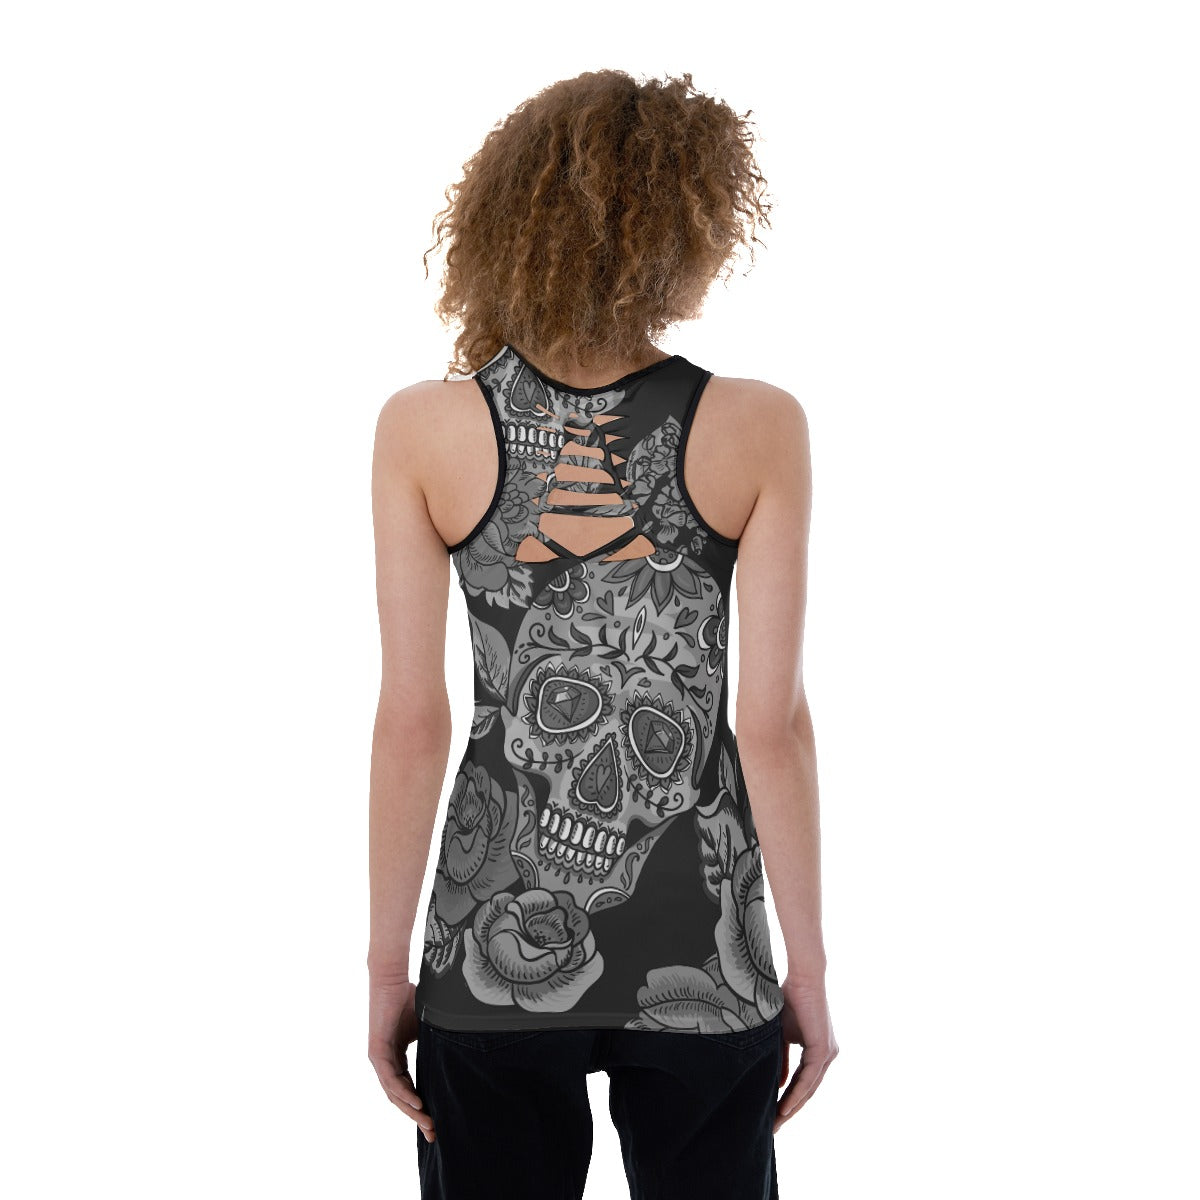 Day of the dead Women's Back Hollow Tank Top